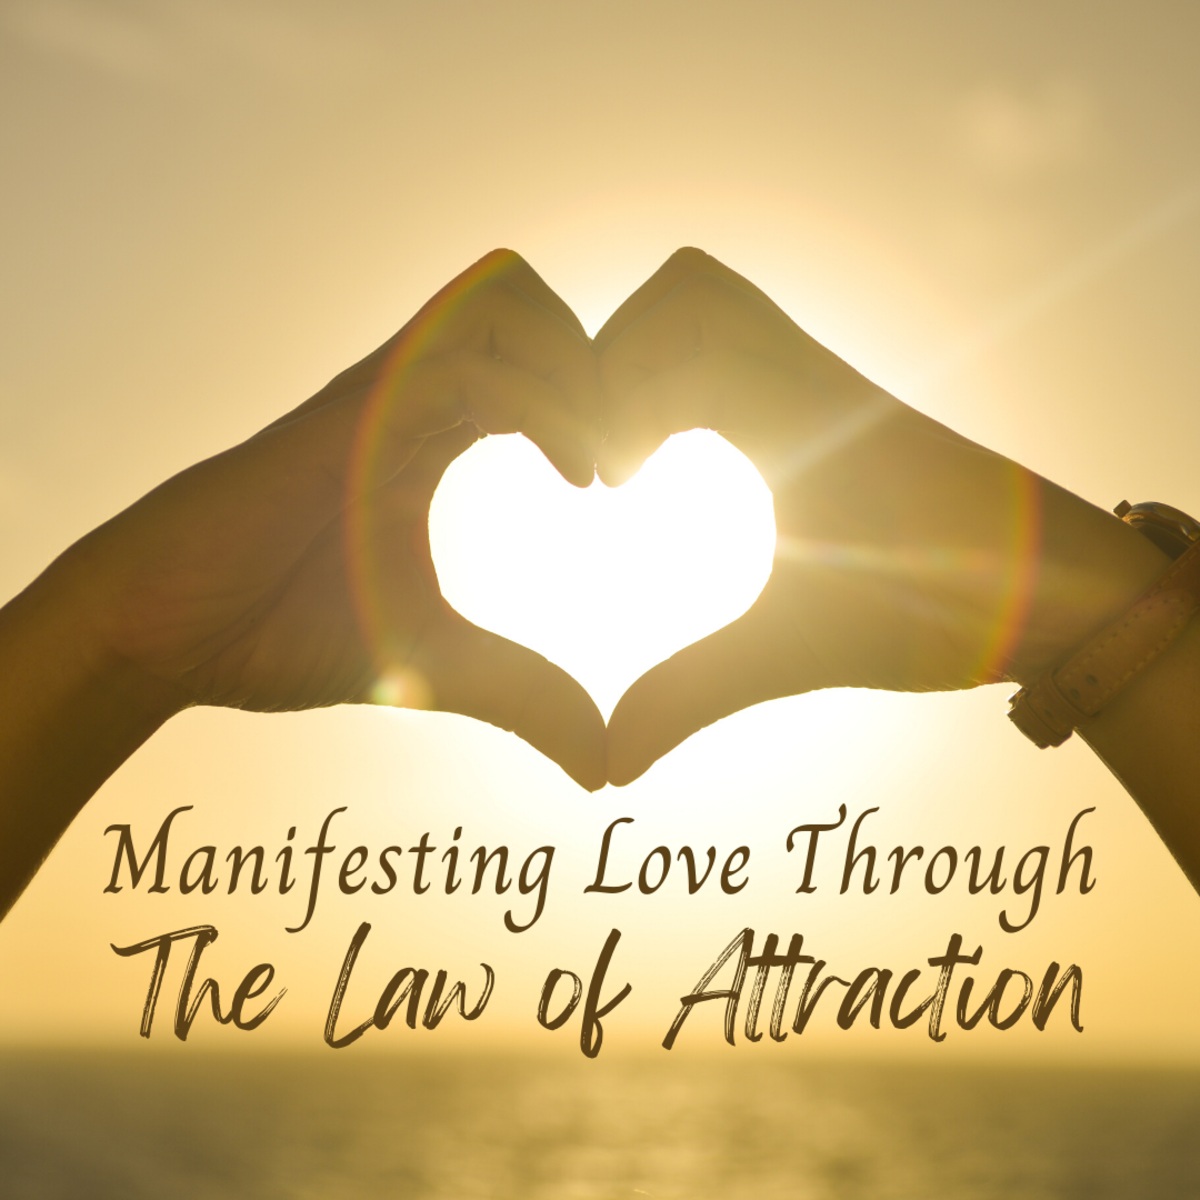 Use the Law of Attraction to manifest love!